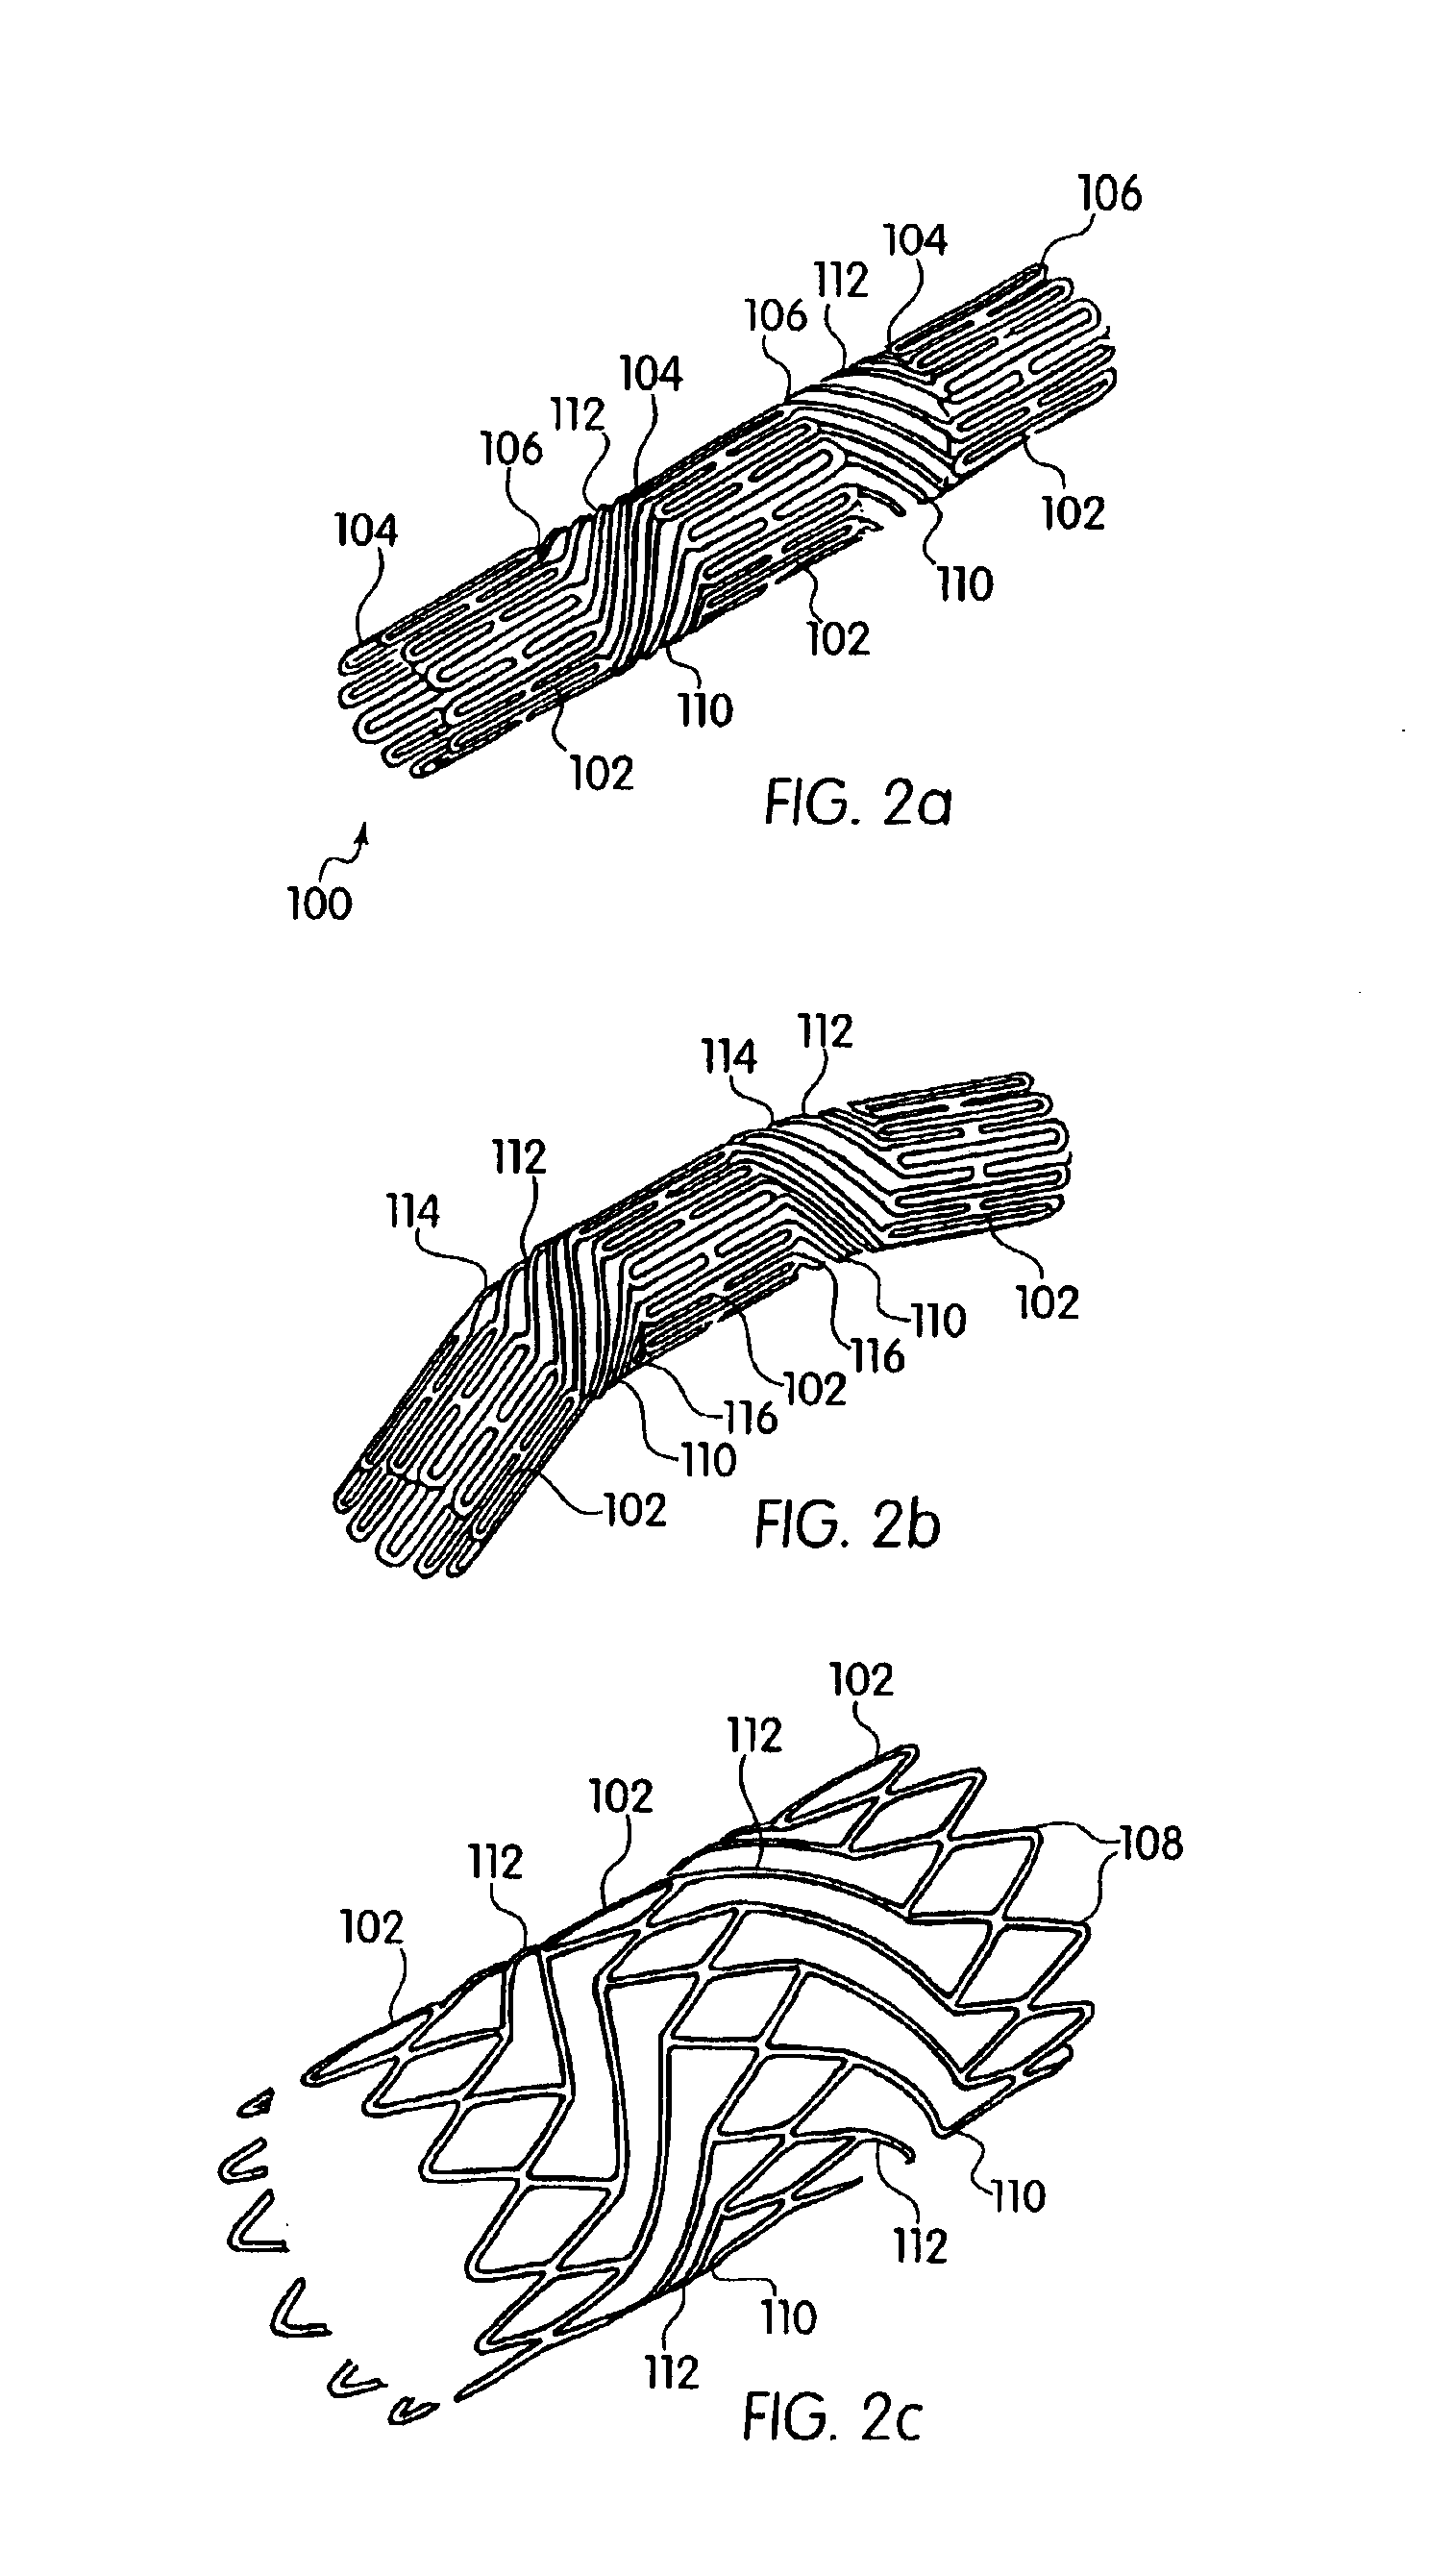 Articulated stent